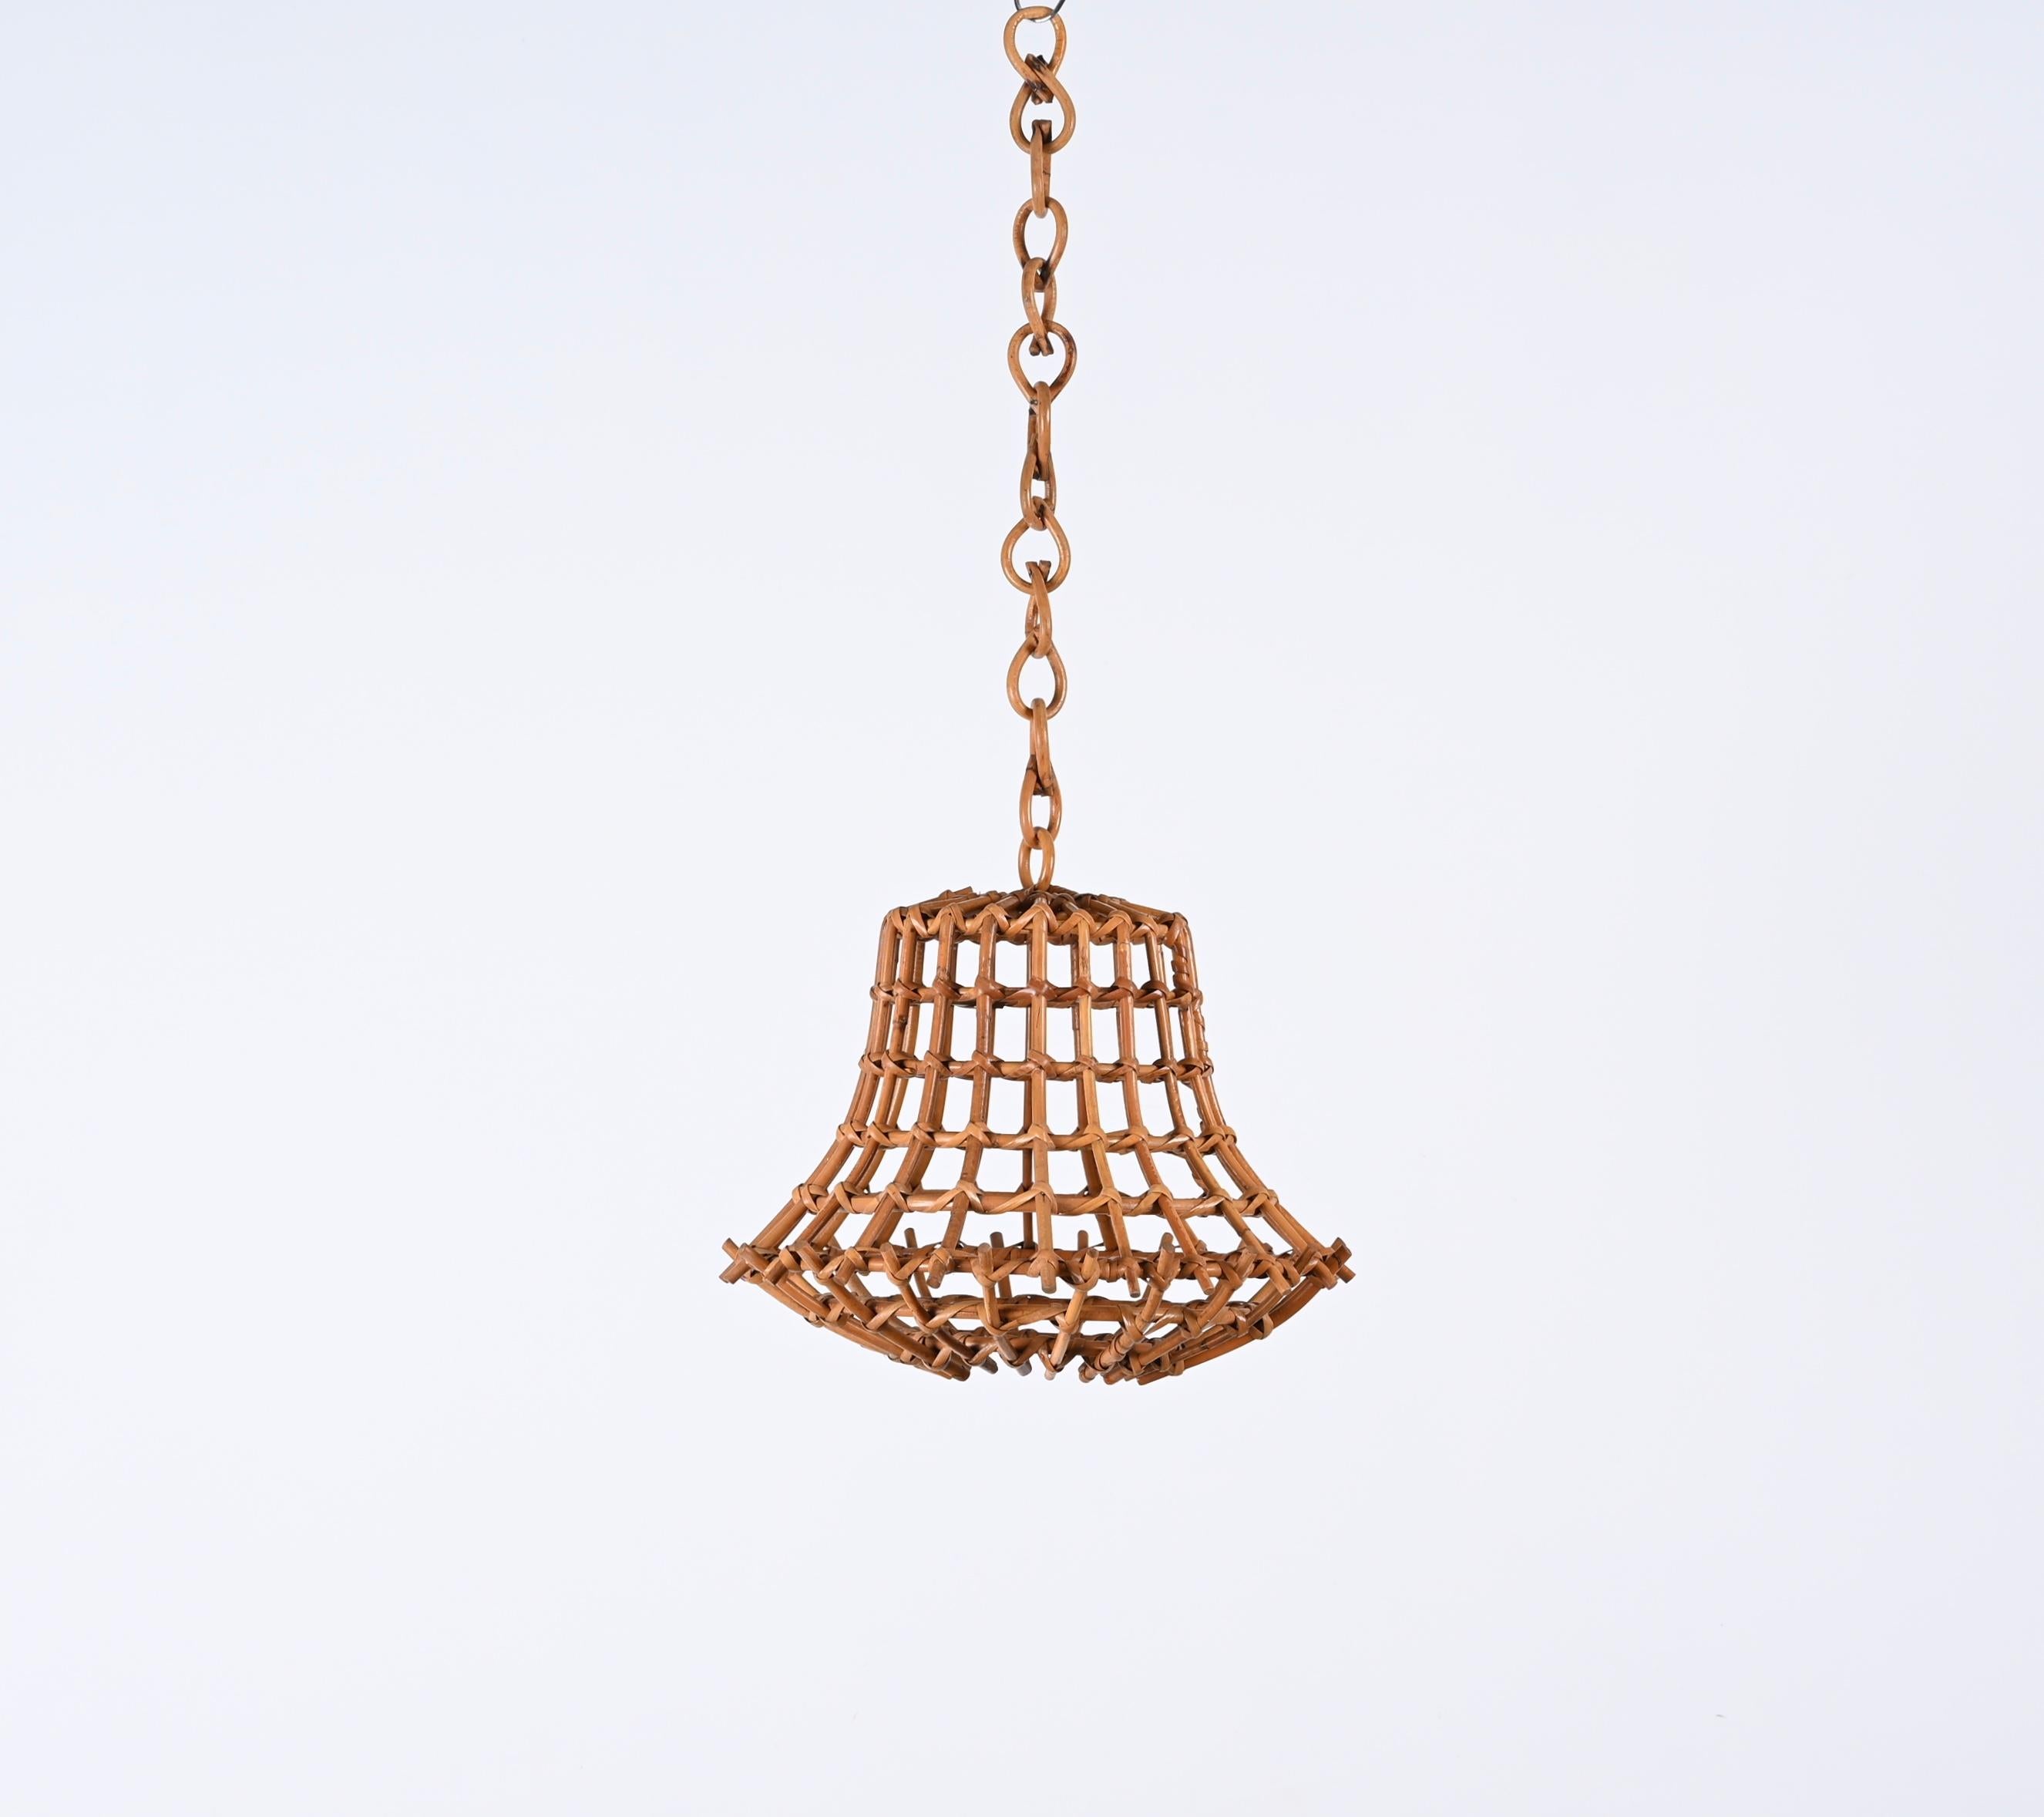 Stunning midcentury bamboo and rattan chandelier. This astonishing piece was produced in France during the 1960s and it is attributed to Louis Sognot.

A wonderful example of midcentury artisanal work, where bamboo and rattan are perfectly blended